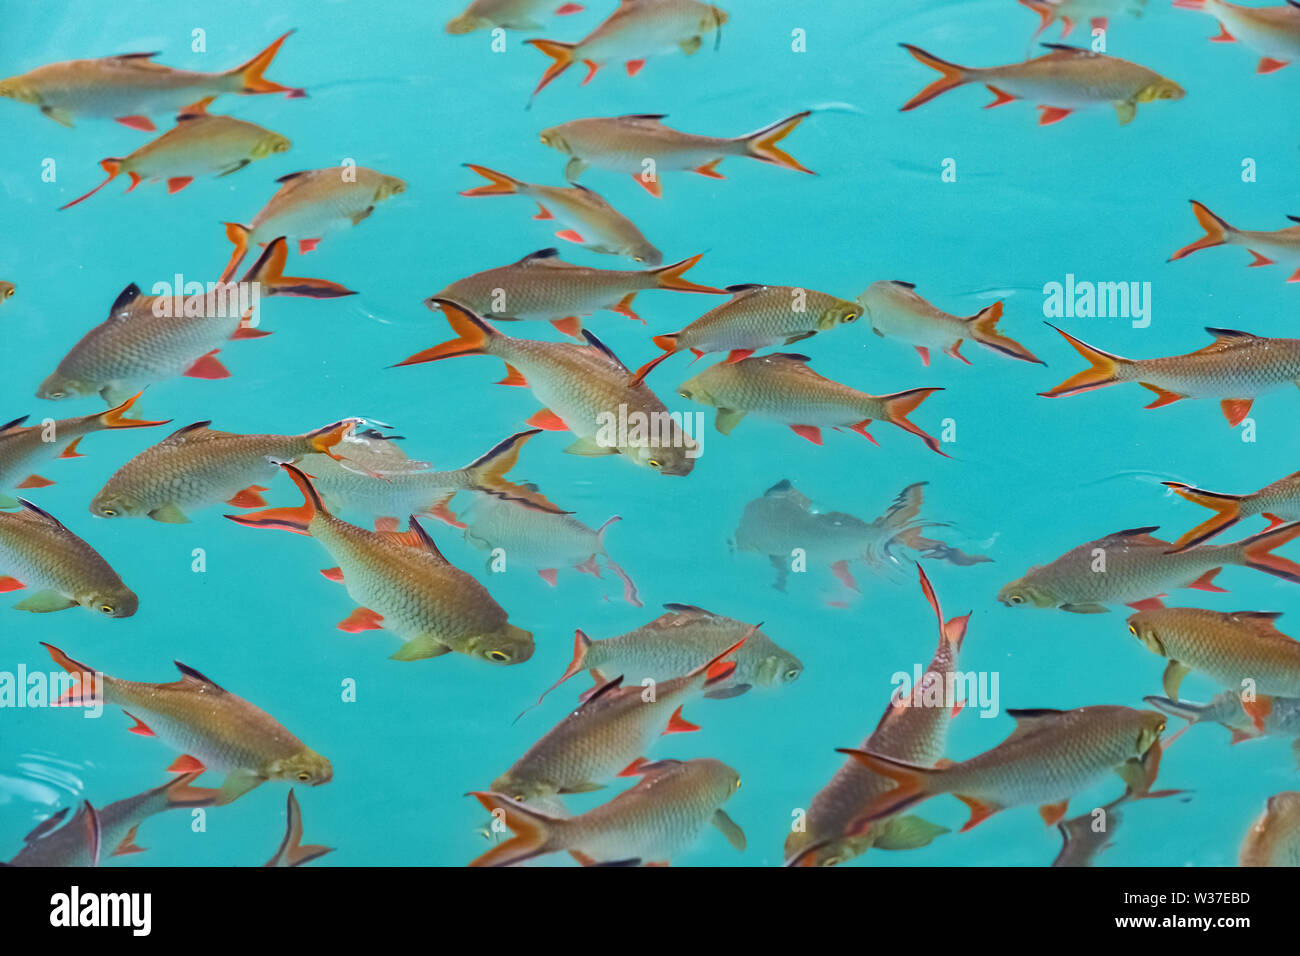 Big group of Red tail carp at Khao Sok National Park in Thailand. Fish in the water background Stock Photo